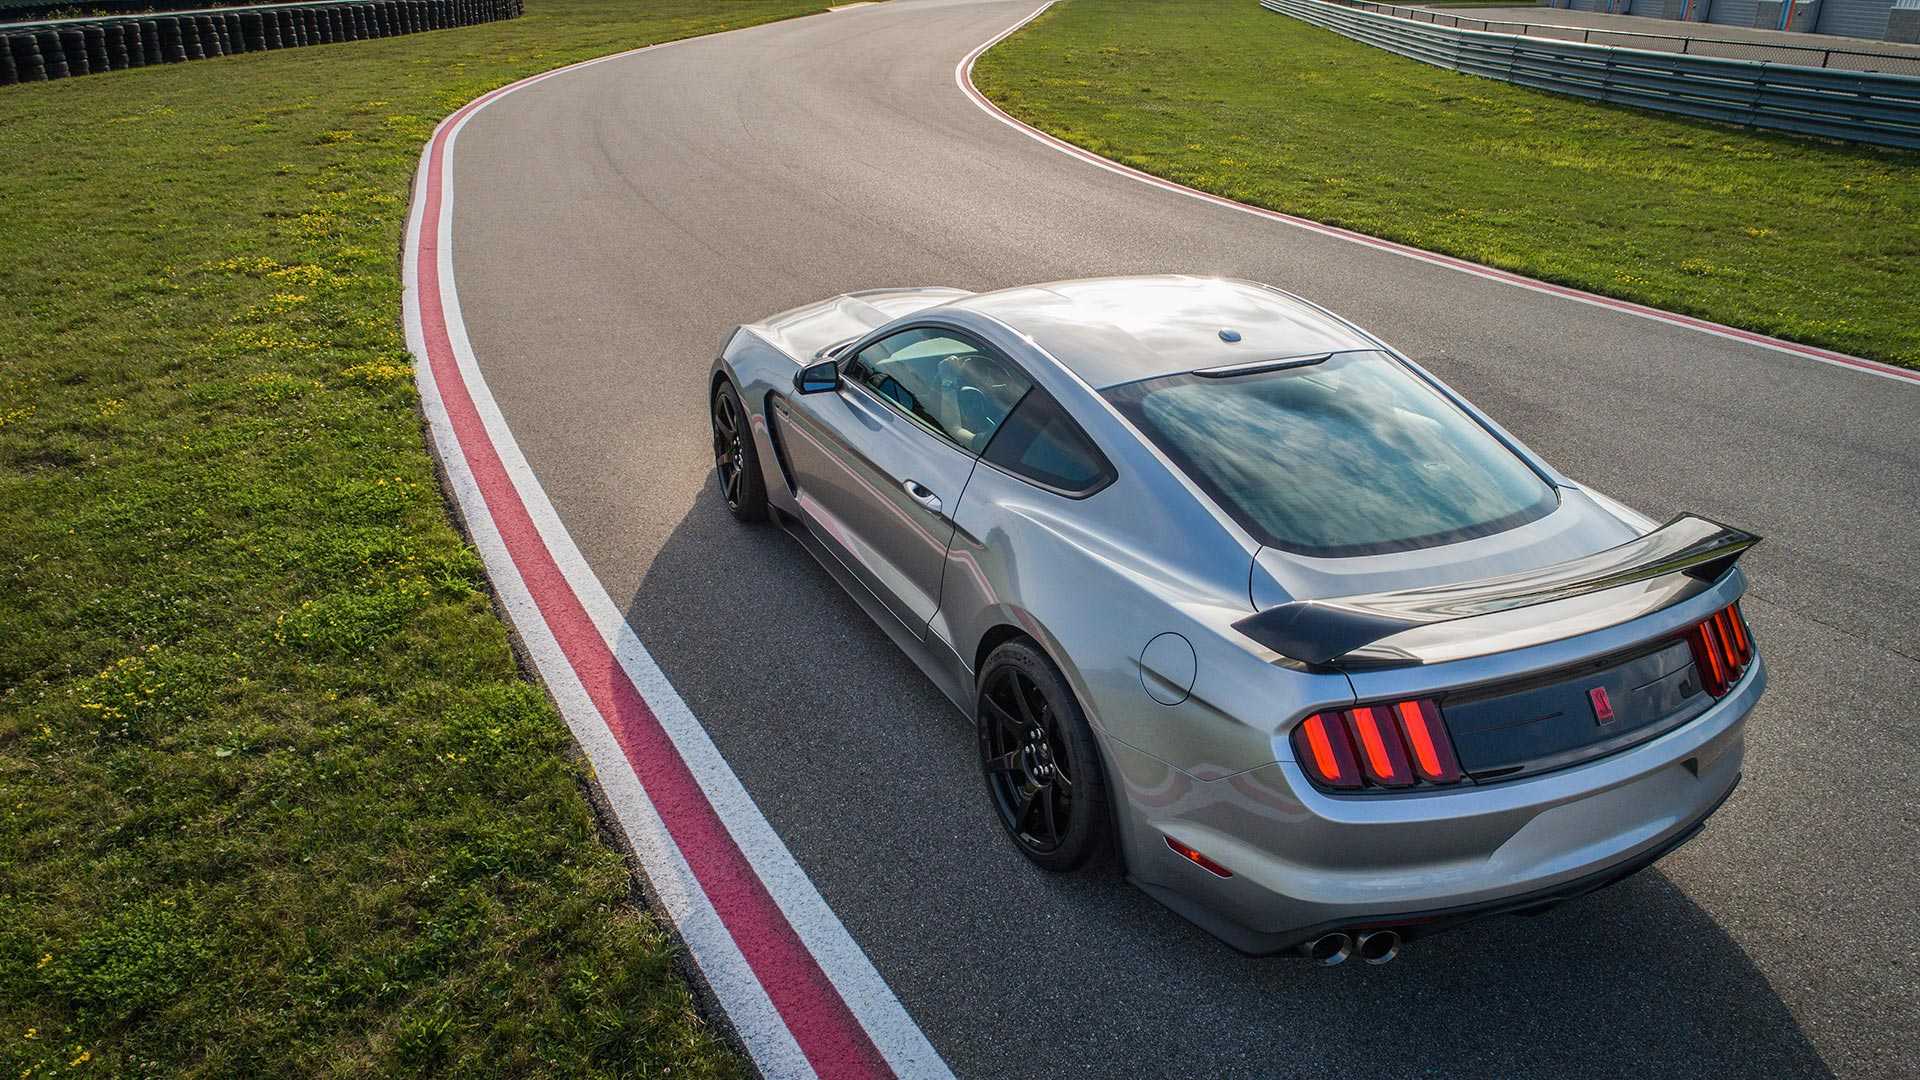 Ford Mustang Shelby GT350R Wallpaper (HD Image)